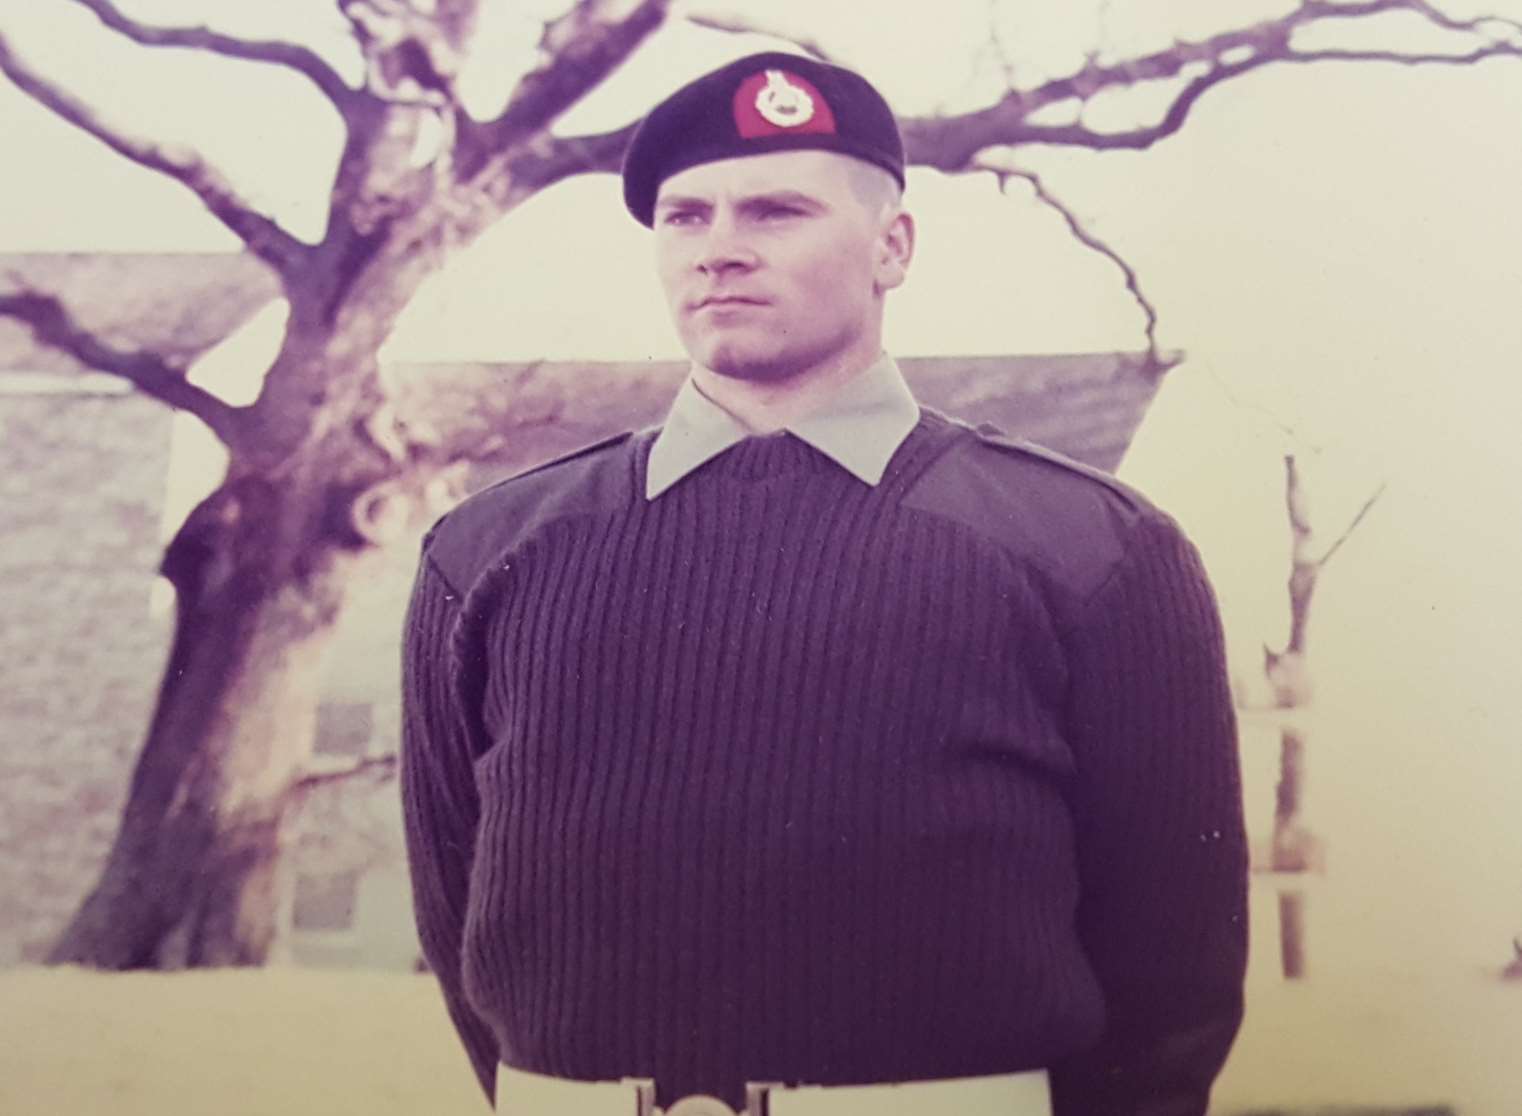 Paul Cosgrave was a corporal in the Royal Marines